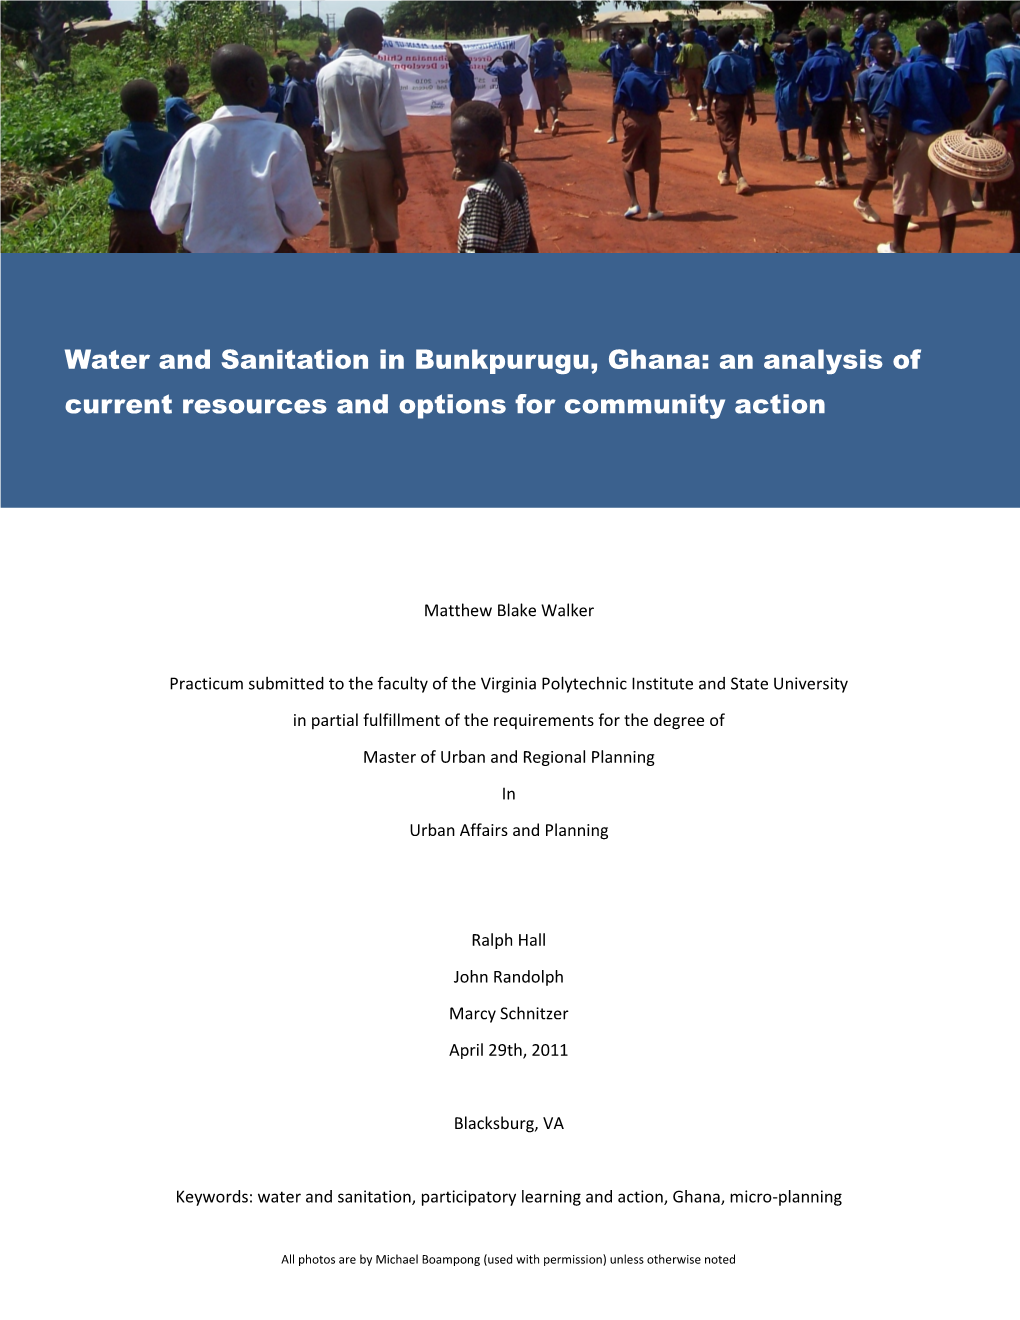 Water and Sanitation in Bunkpurugu, Ghana: an Analysis of Current Resources and Options for Community Action